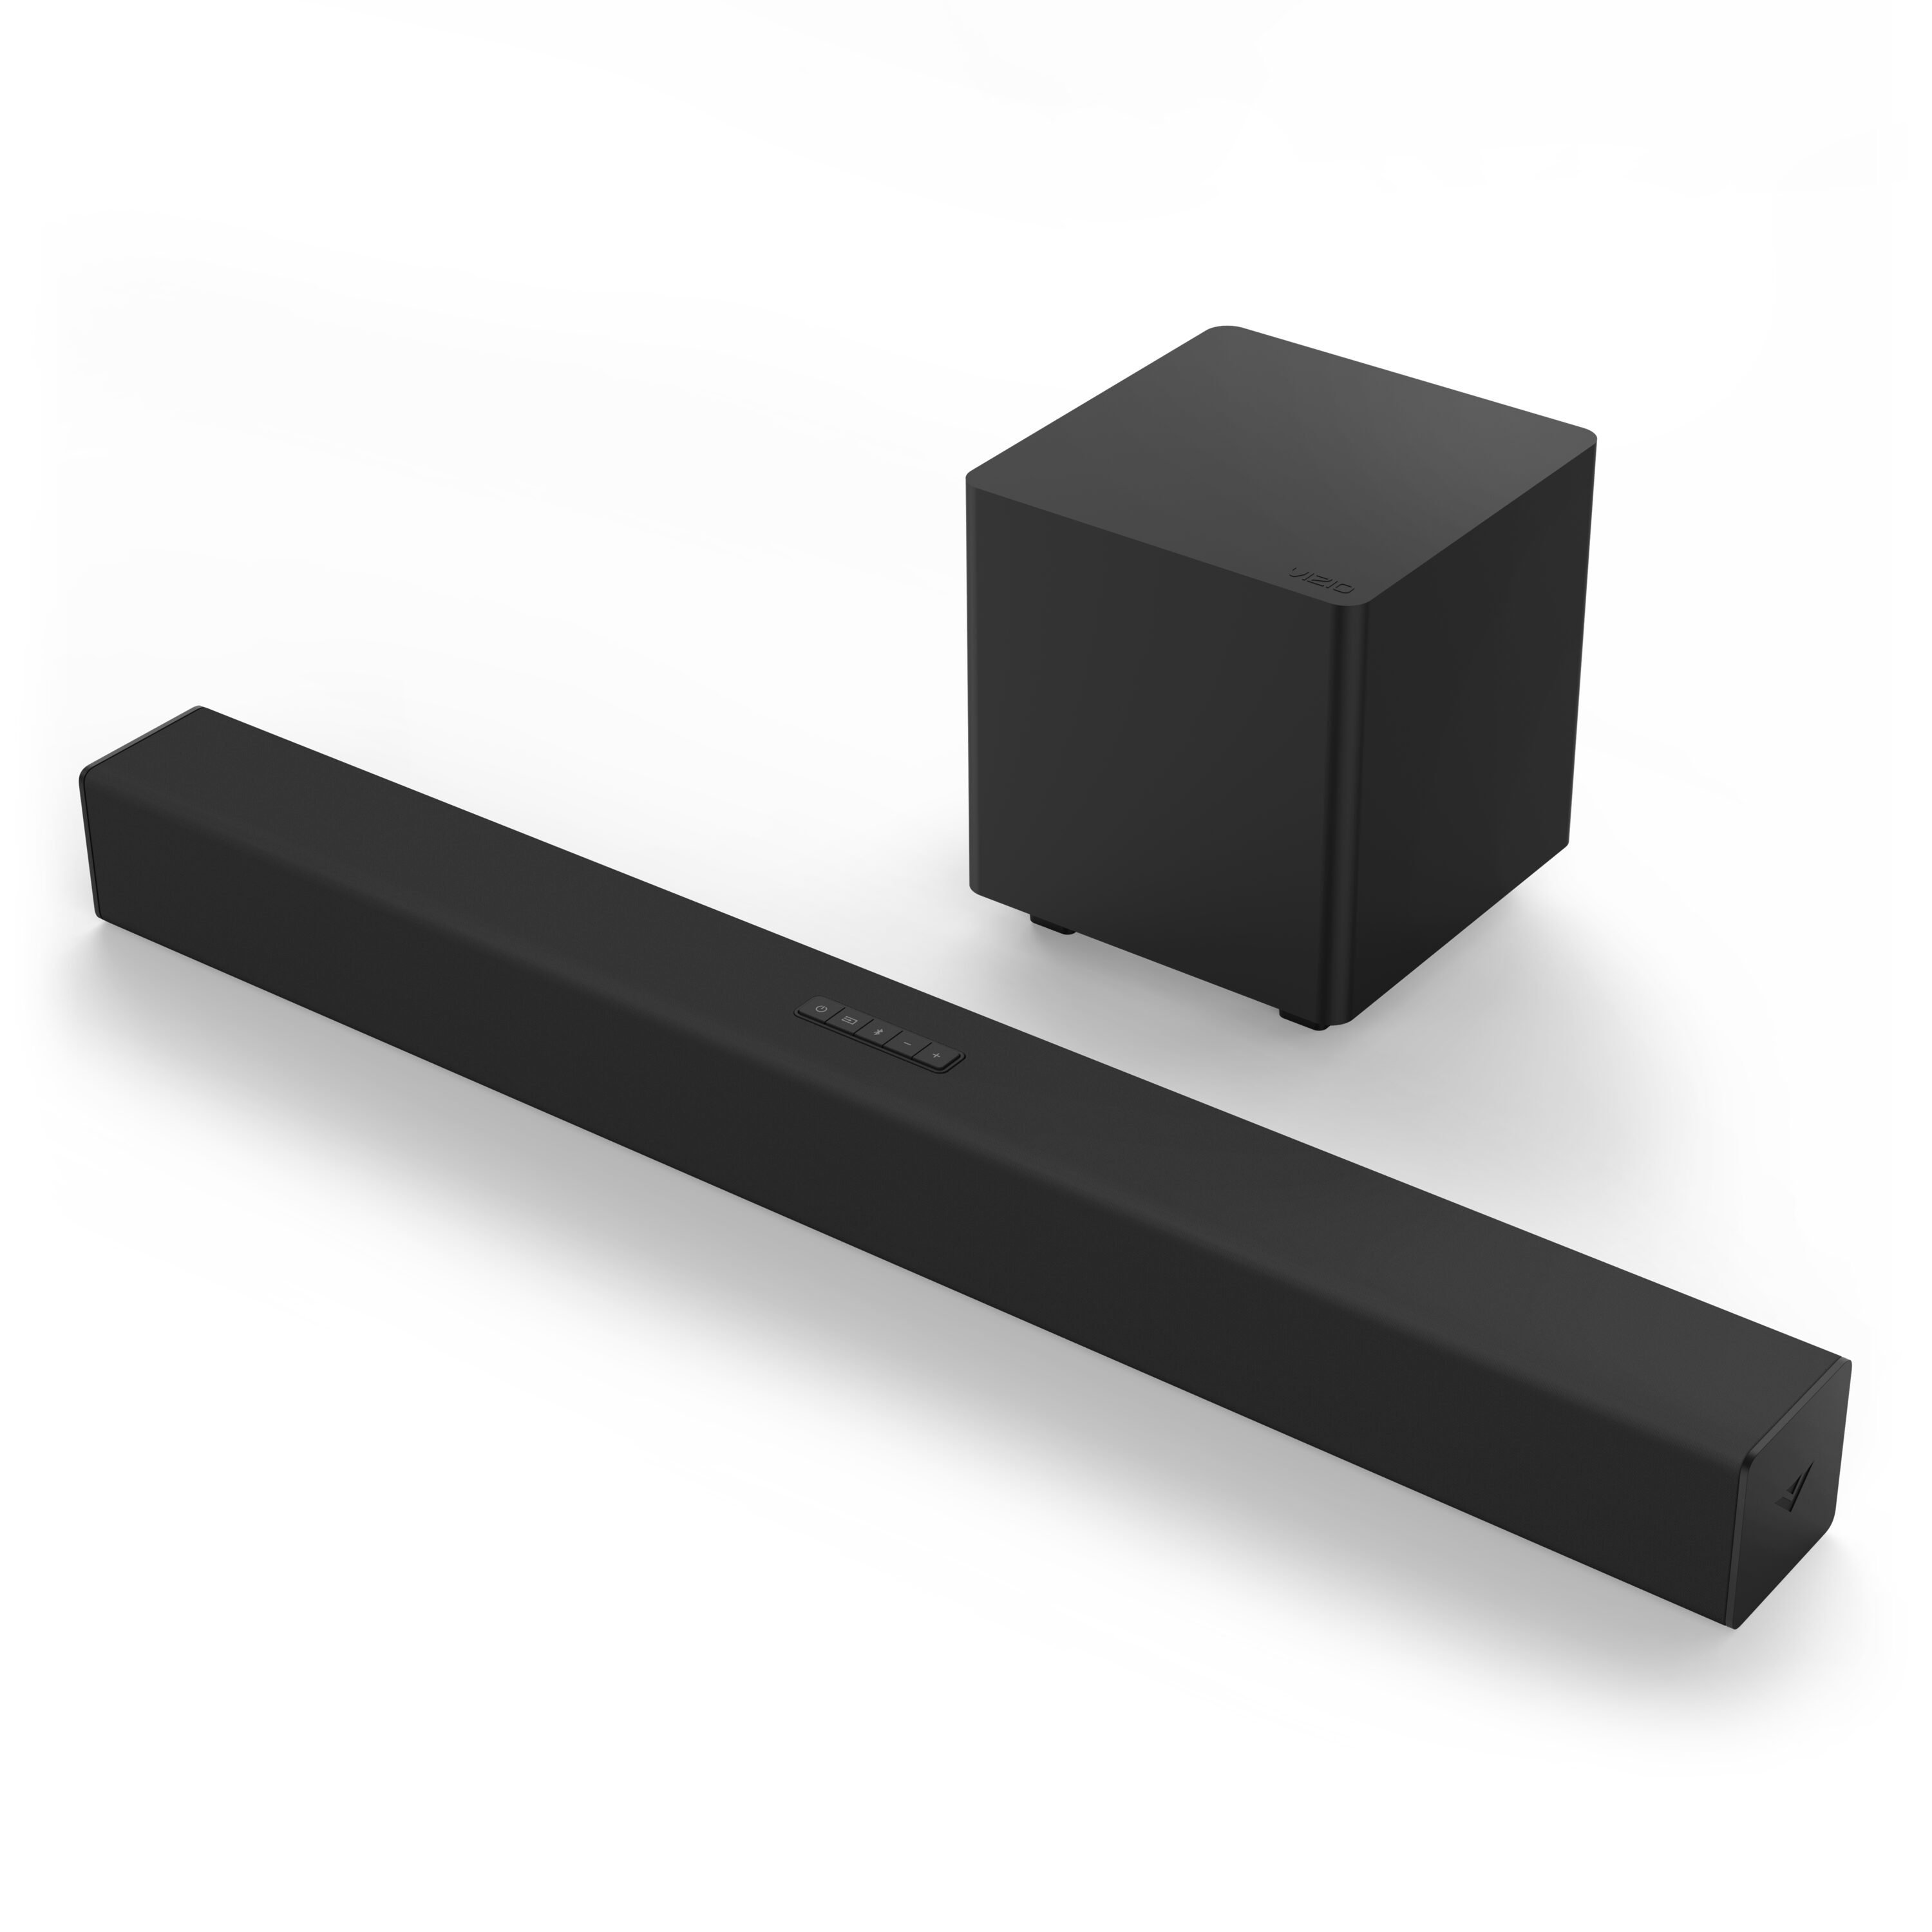 VIZIO 2.1 Home Theater Sound Bar with DTS Virtual:X, Wireless Subwoofer SB3221n-J6 - image 2 of 9